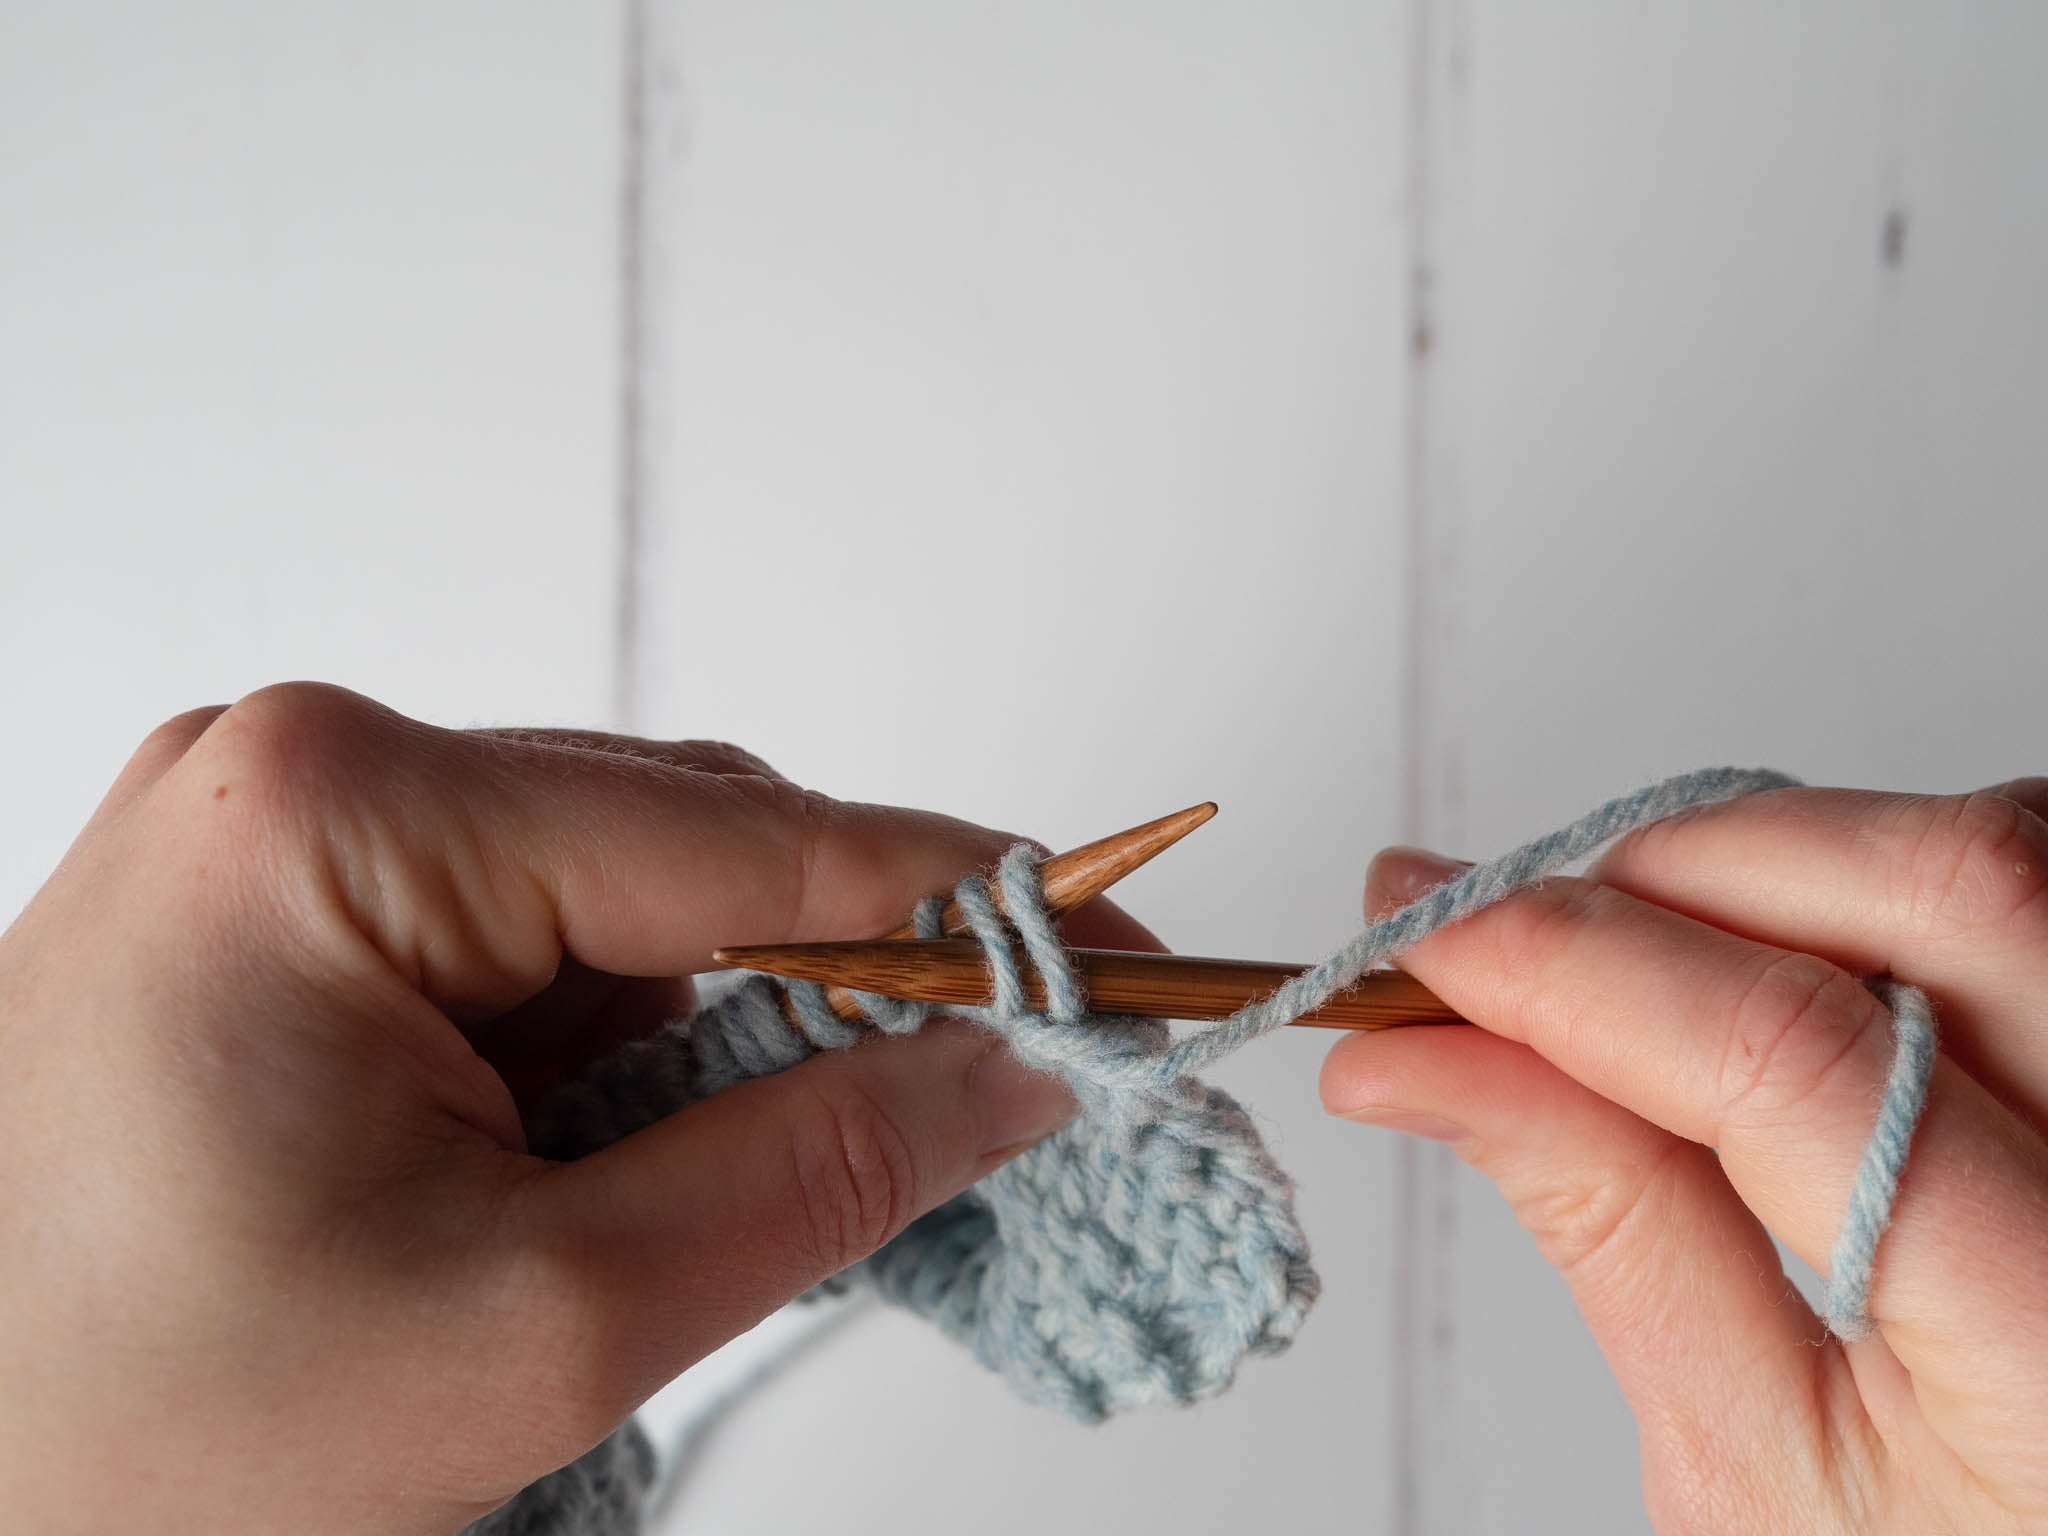 Crochet Fundamentals: How to Fasten Off Using Your Darning Needle